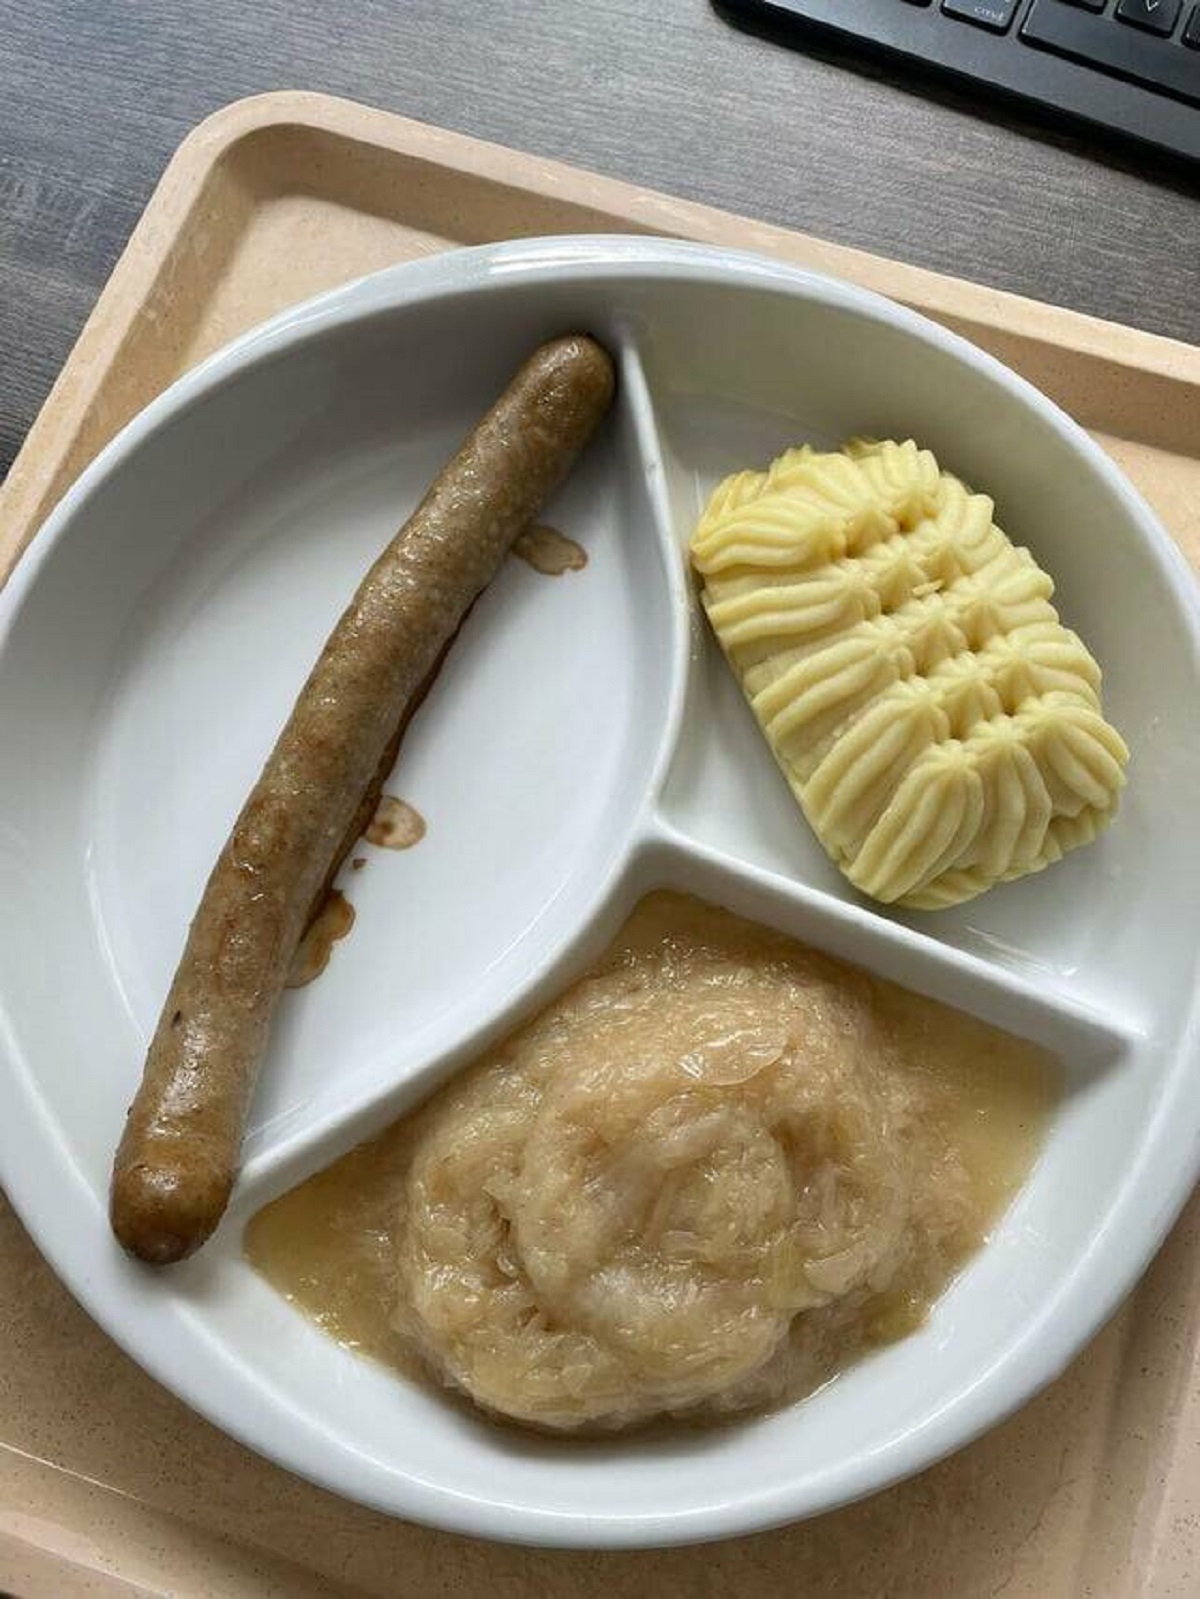 "German hospital lunch today"